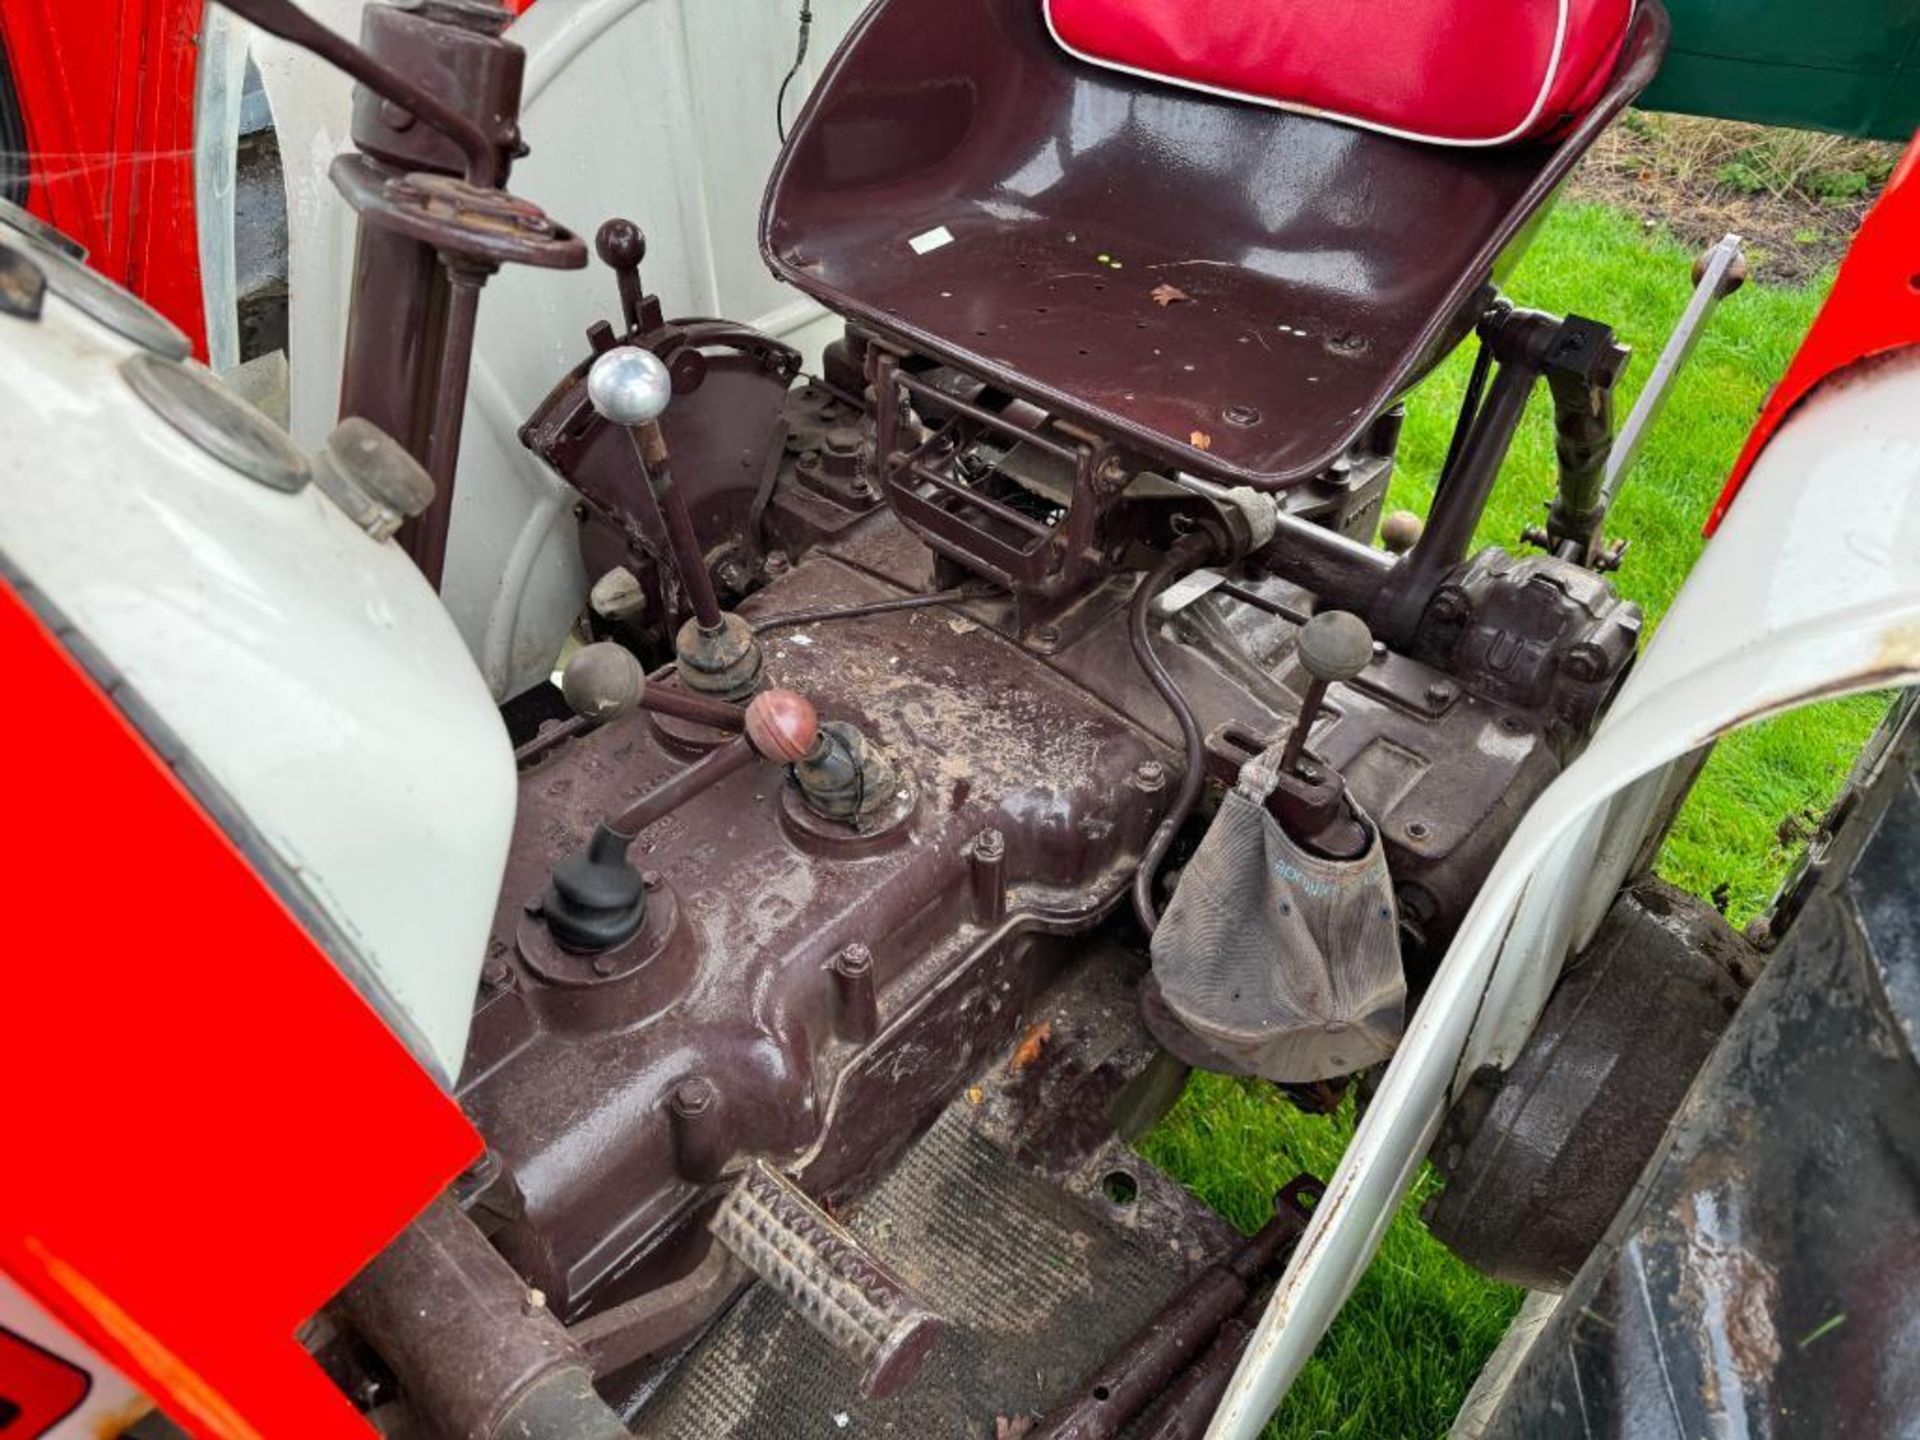 1968 David Brown 880 Selectamatic 2wd diesel tractor with canvas cab, rear hydraulic valve, PTO, rea - Image 19 of 19